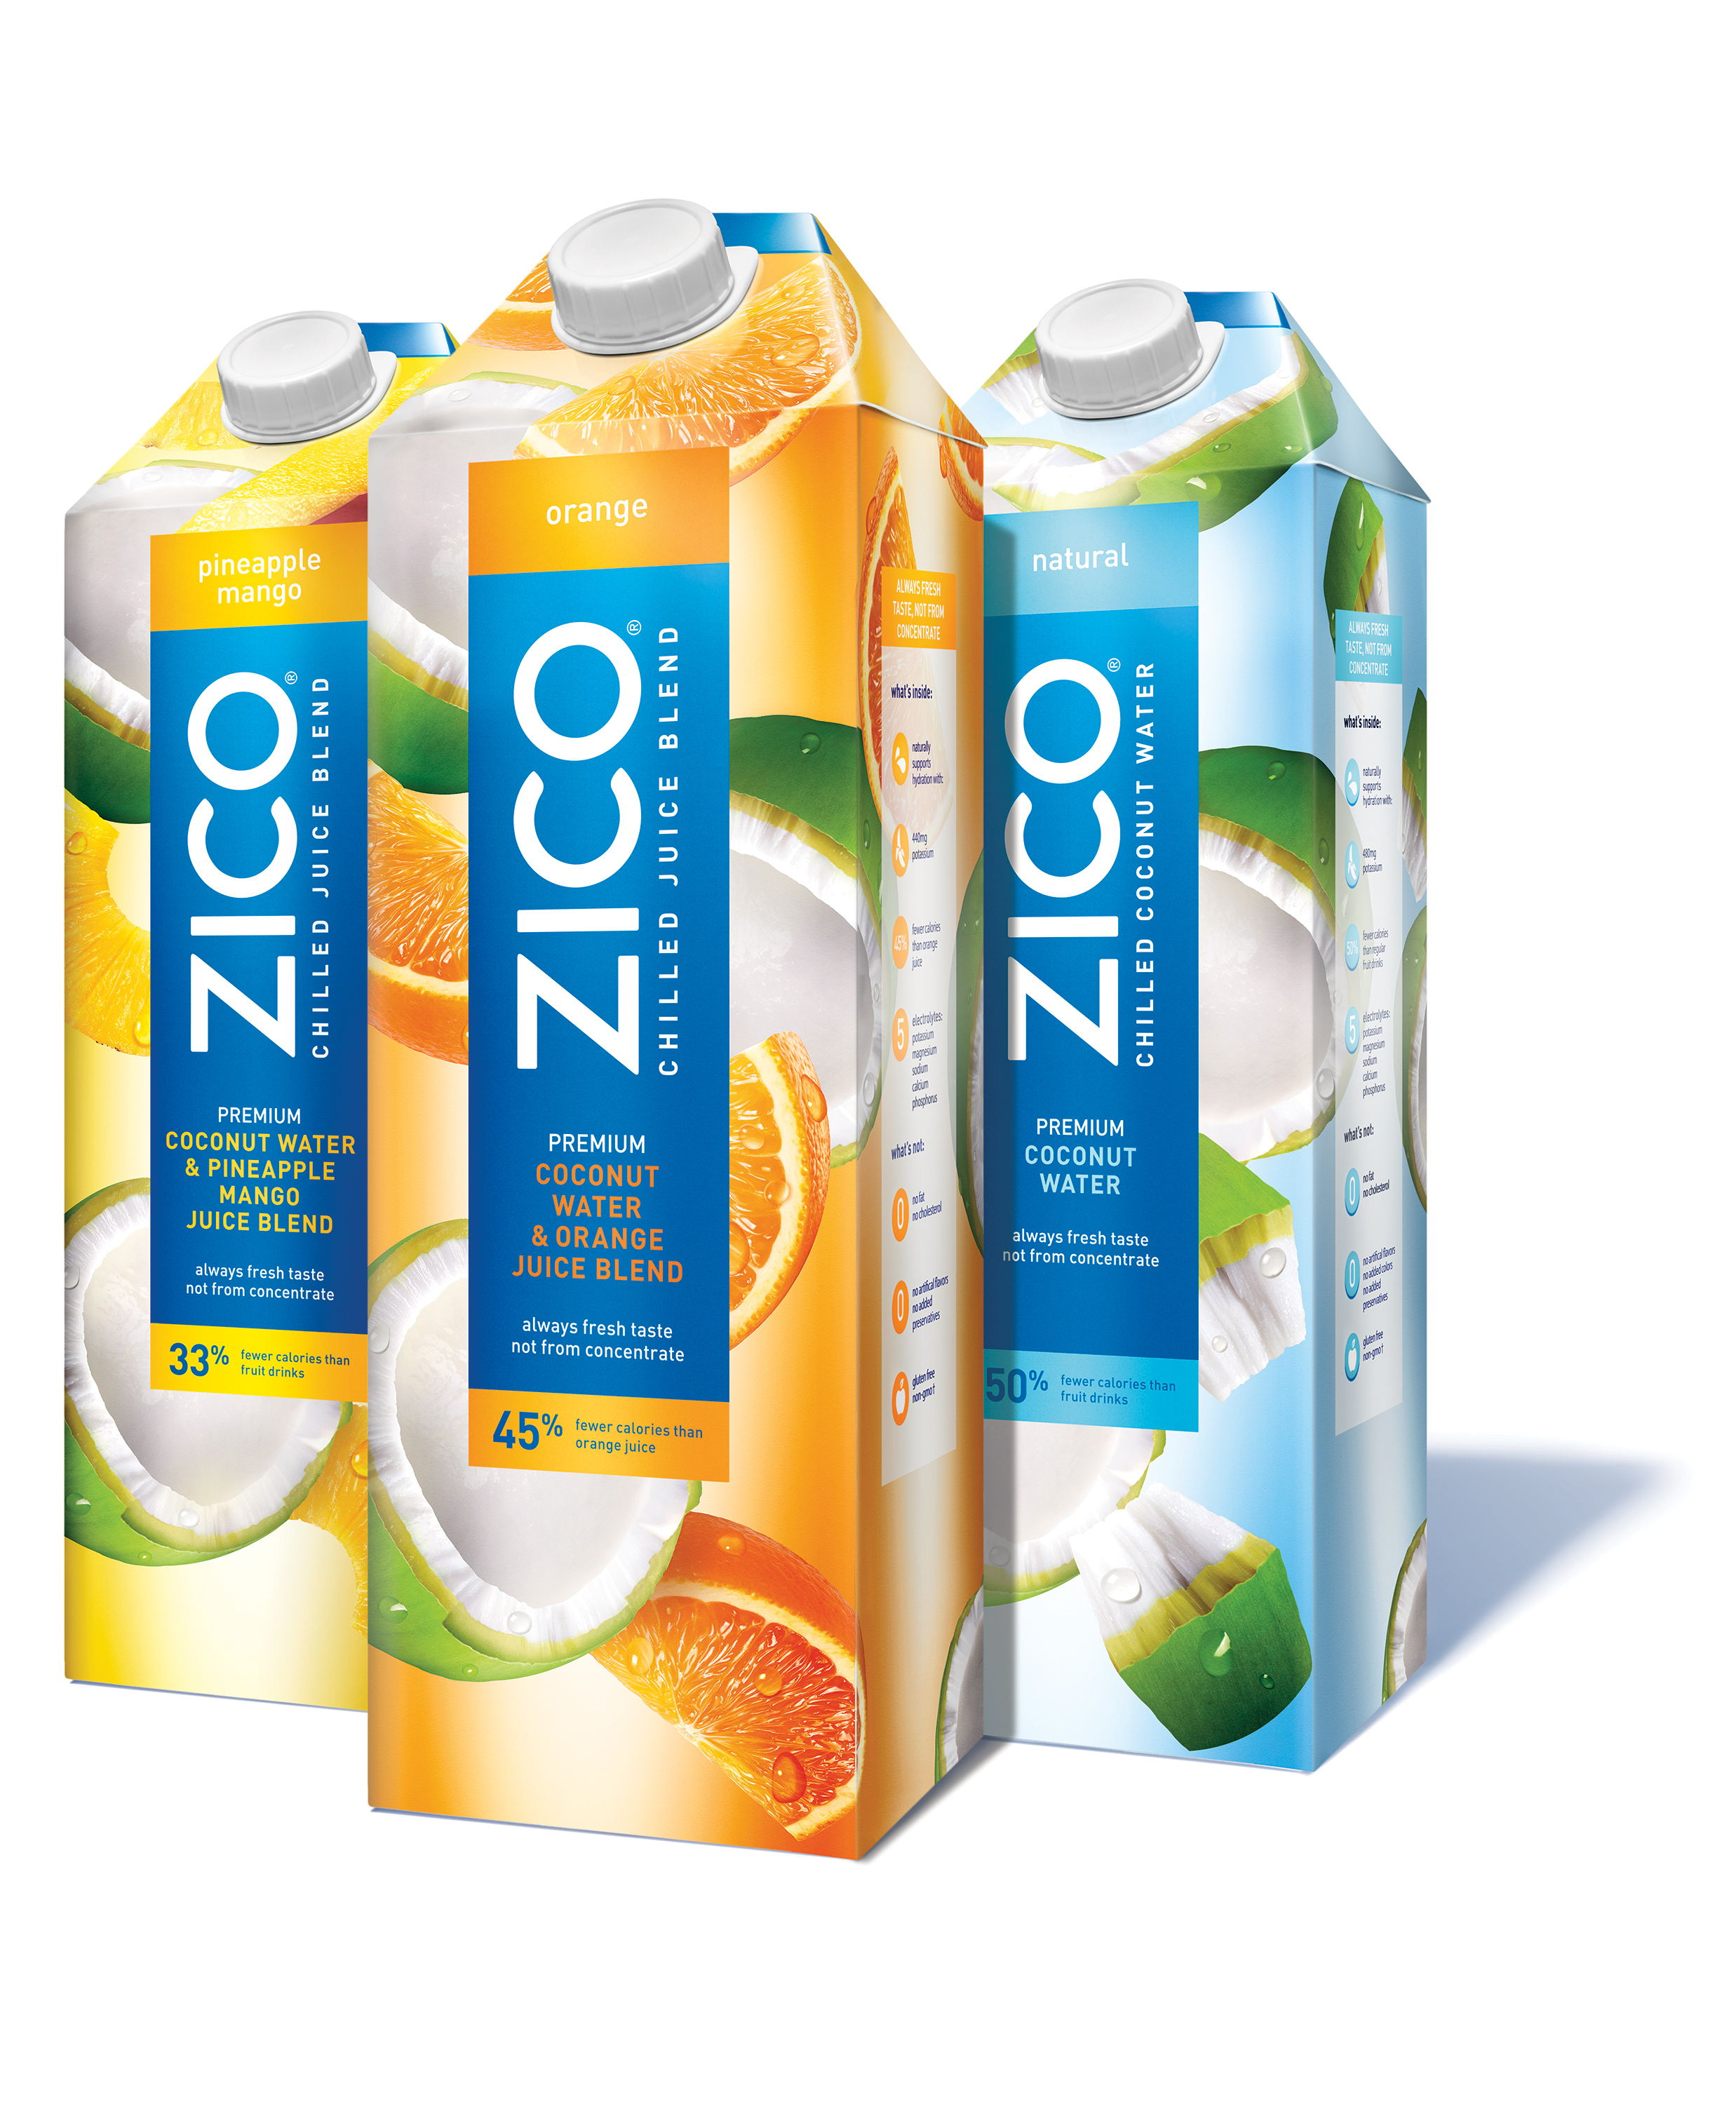 zico introduces chilled premium coconut water & juice blends